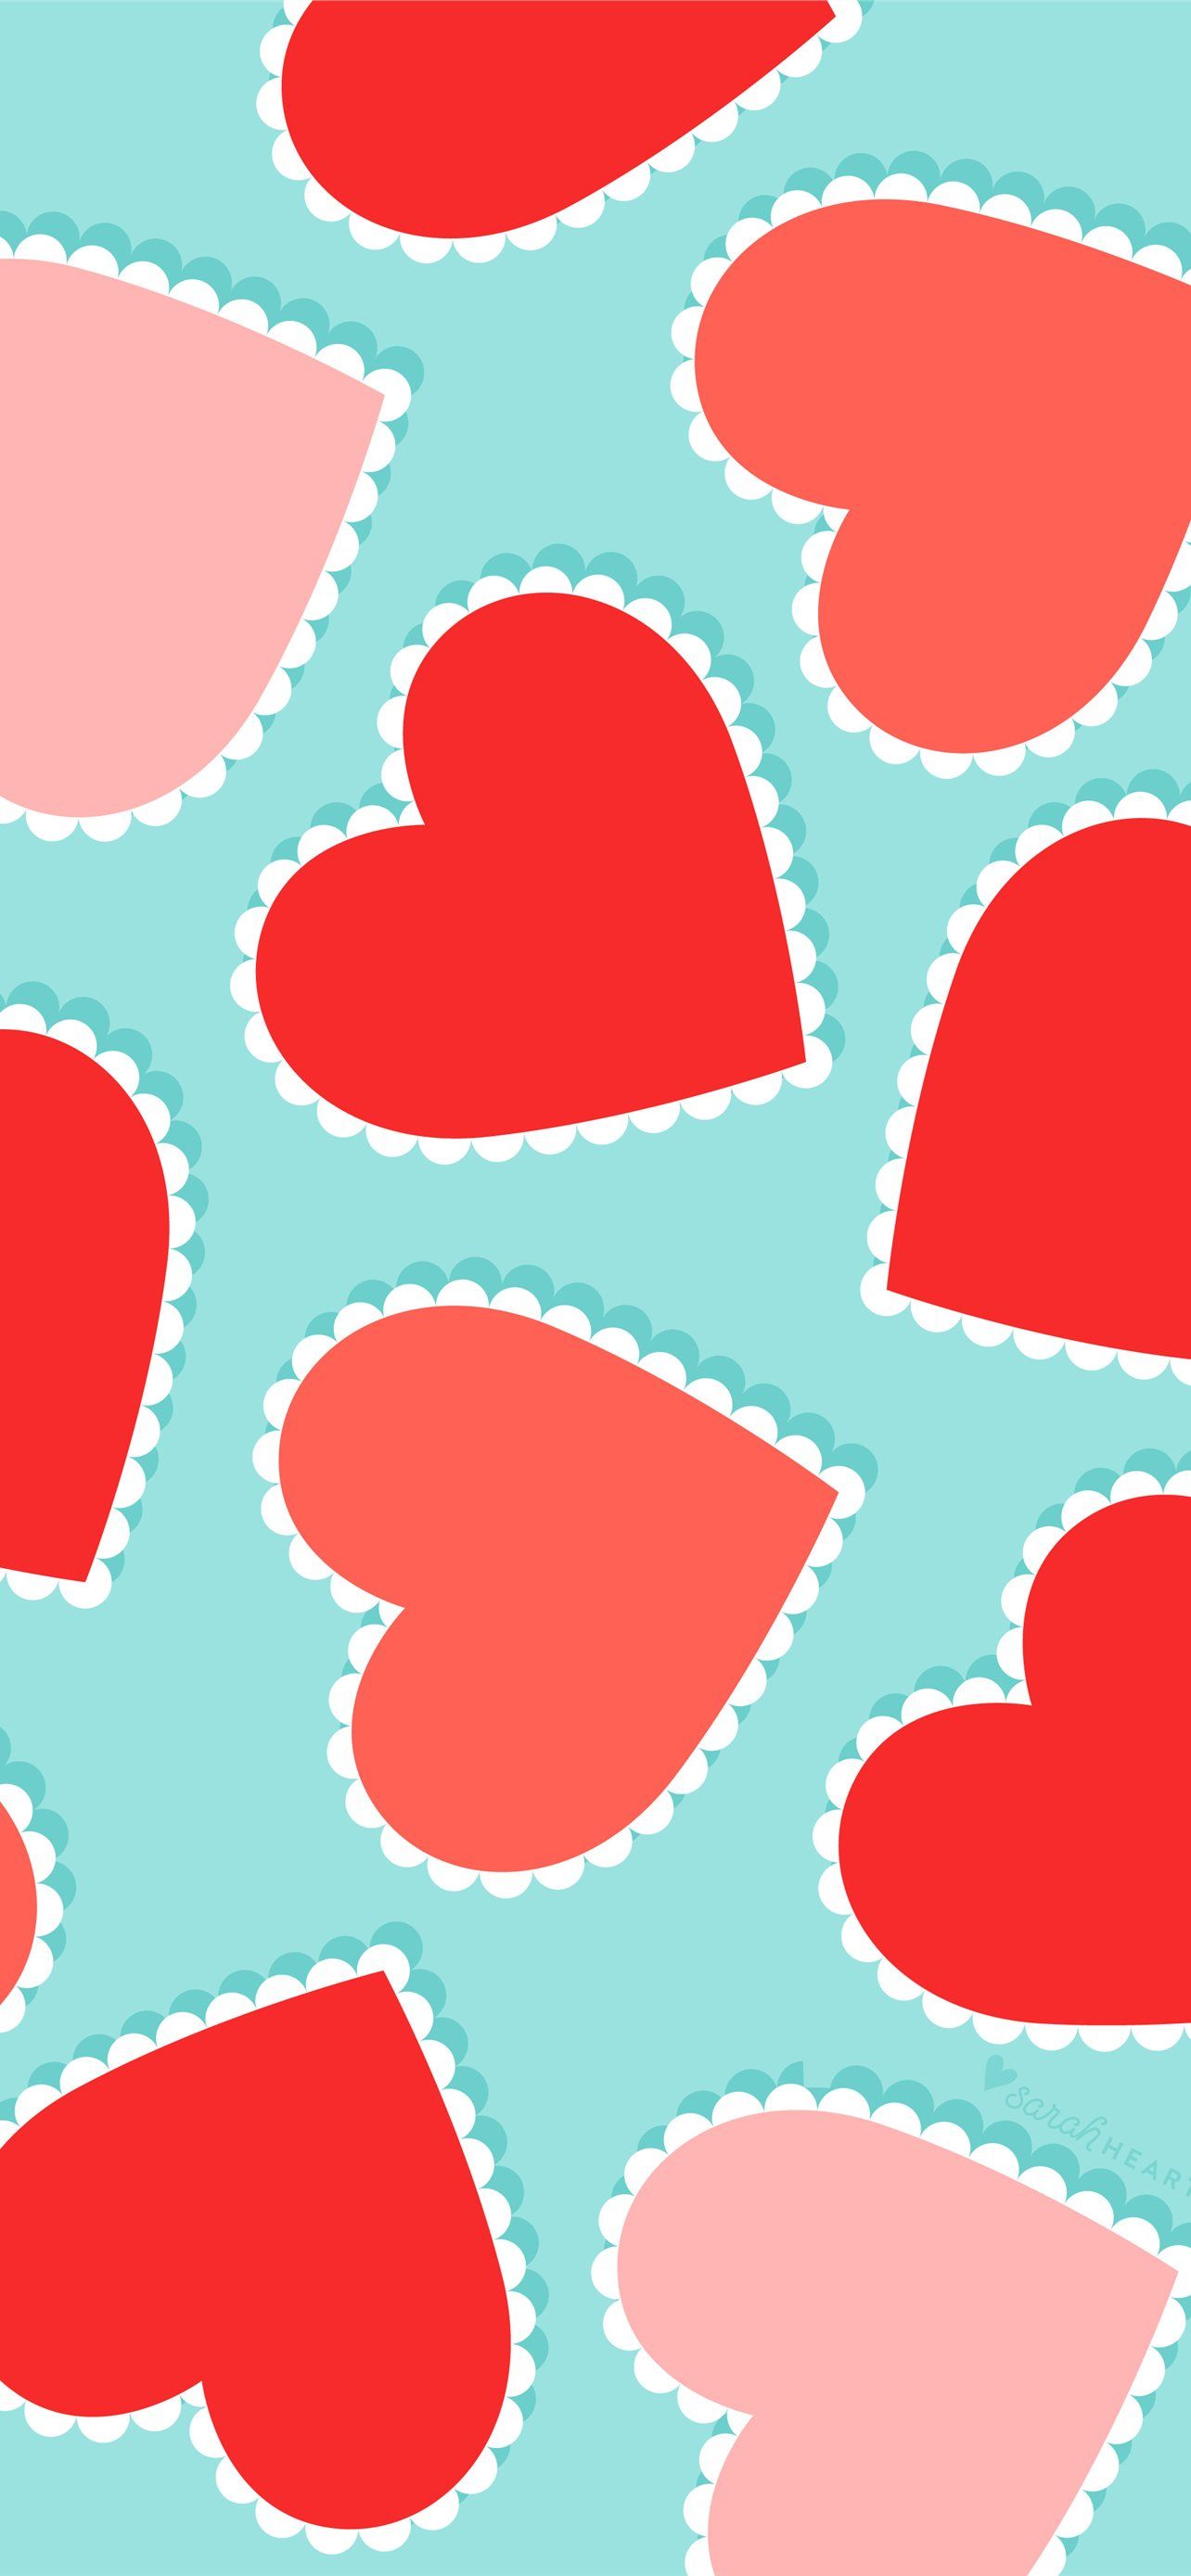 A pattern of red and pink hearts - Valentine's Day